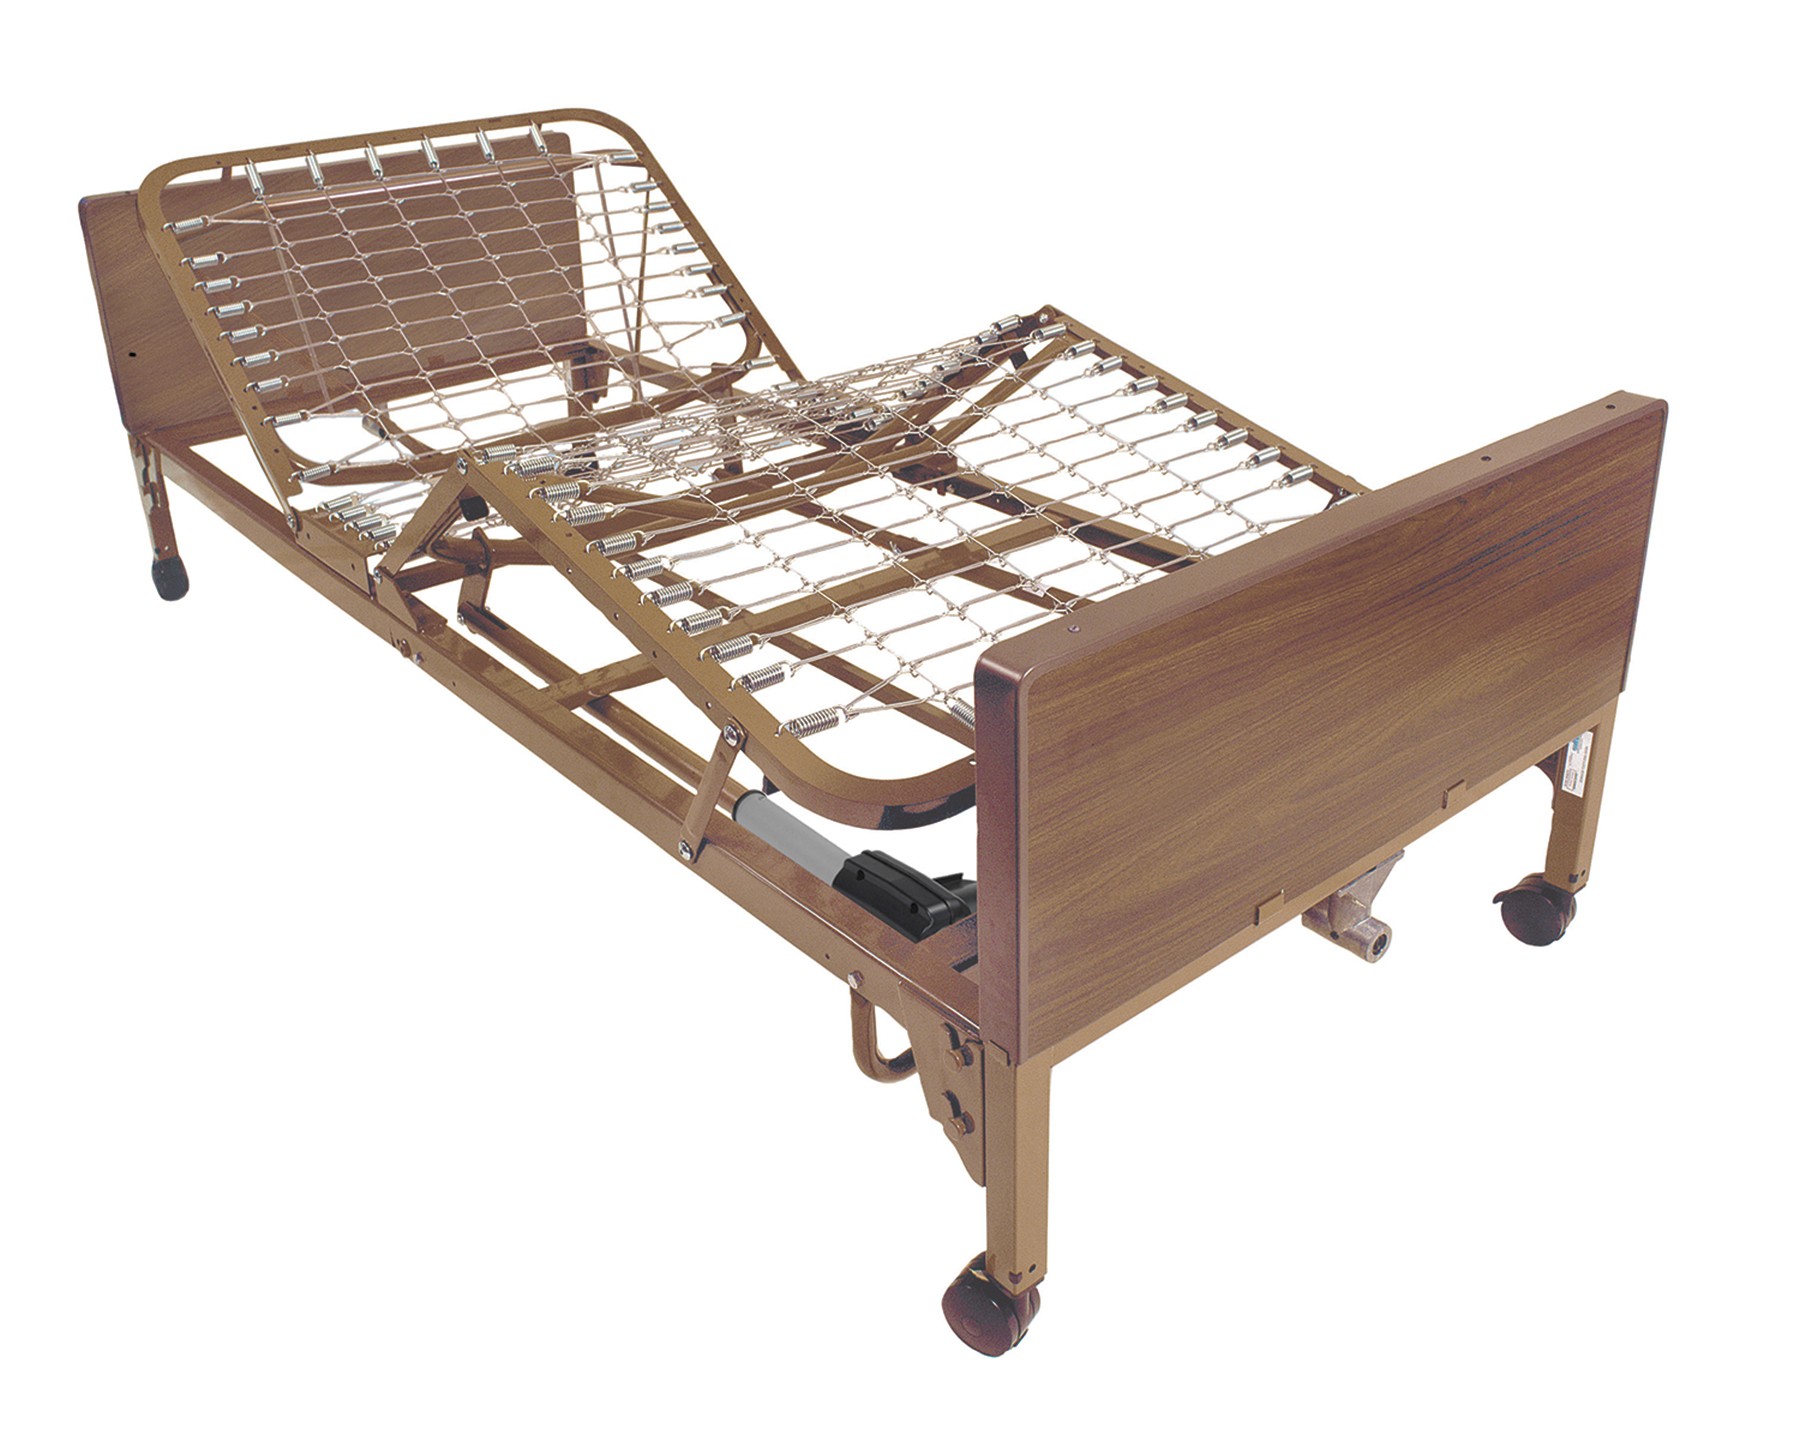 Surprise inexpensive Electric Hospital Beds cheap discount sale price